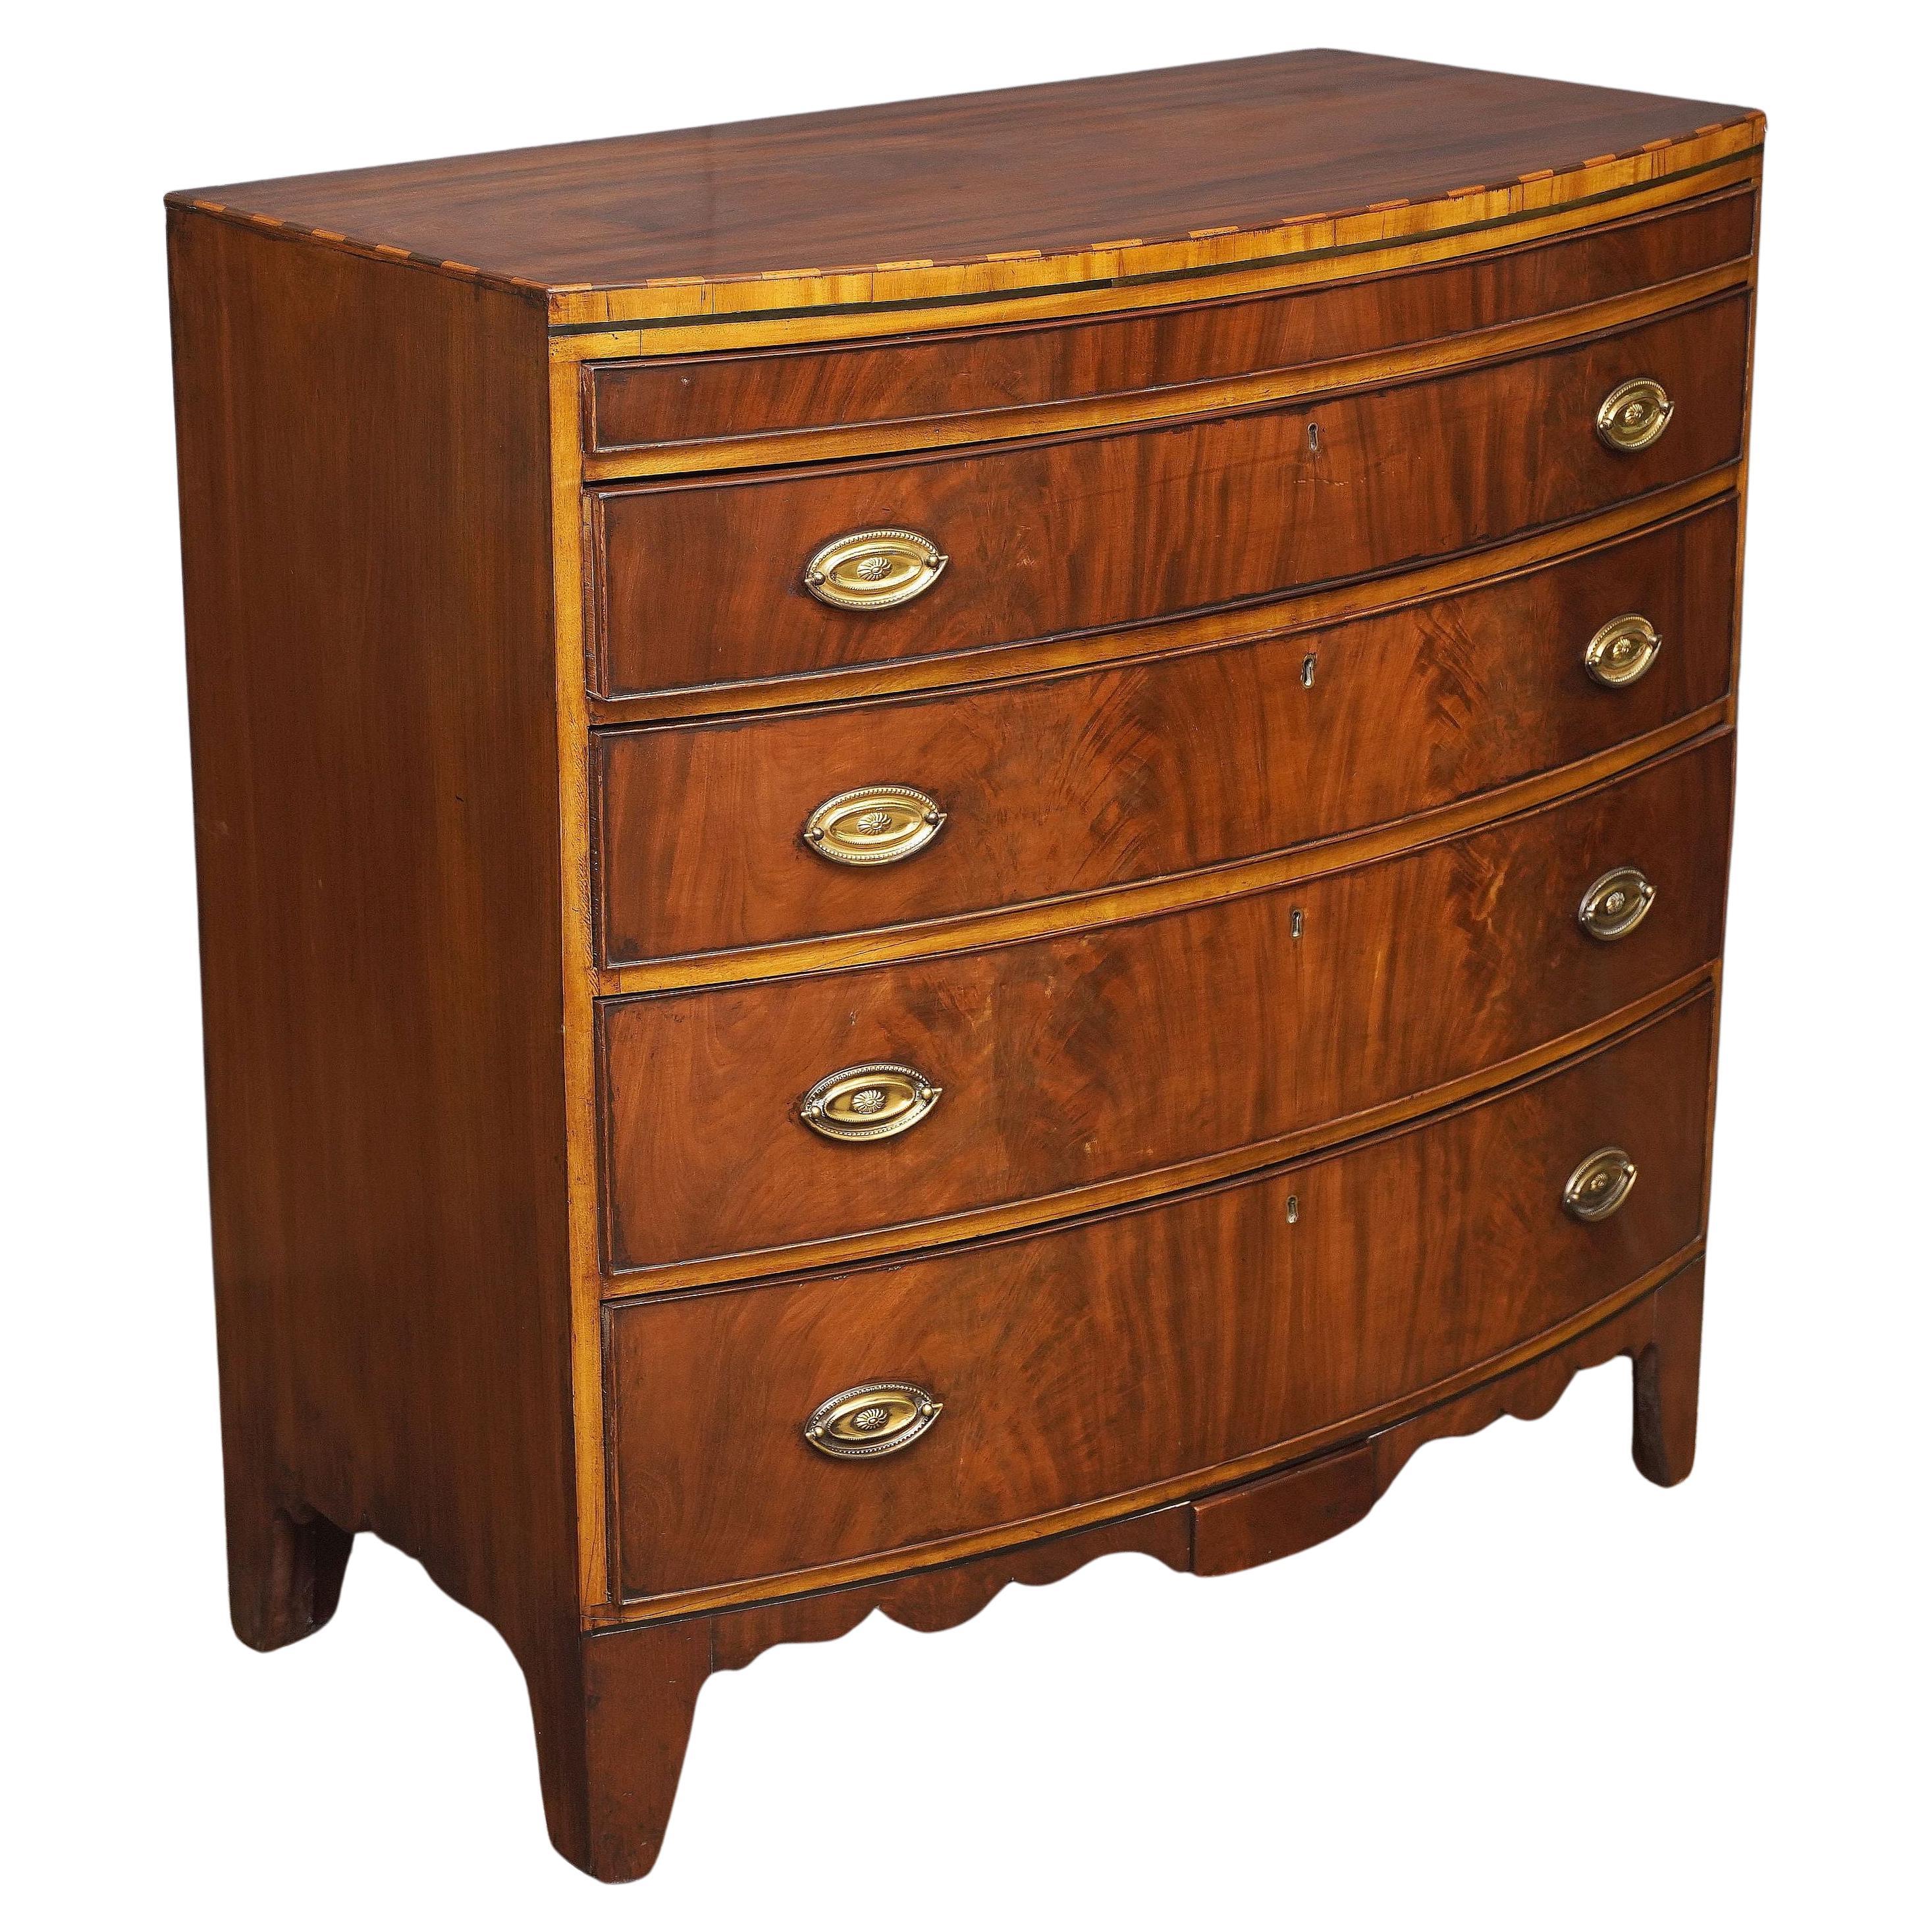 A fine English bow fronted chest of drawers of inlaid mahogany, with two secret drawers, from the 19th c century.

Featuring a bowed top with an inlaid trim around the facing top edge, over a frieze of four beaded long drawers, the drawers showing